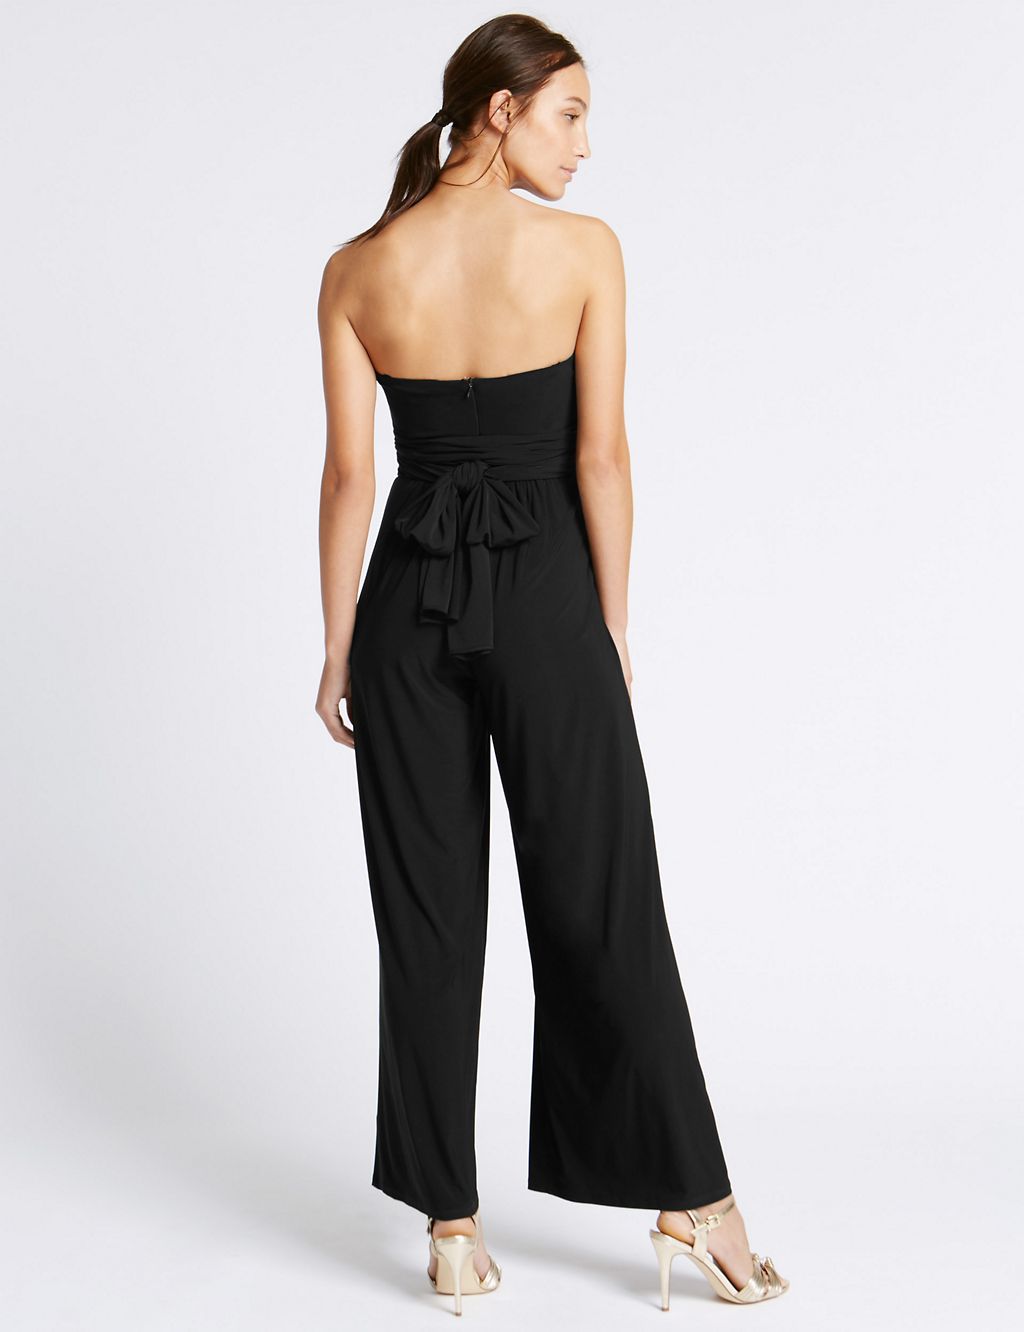 Multiway Sleeveless Jumpsuit | M&S Collection | M&S